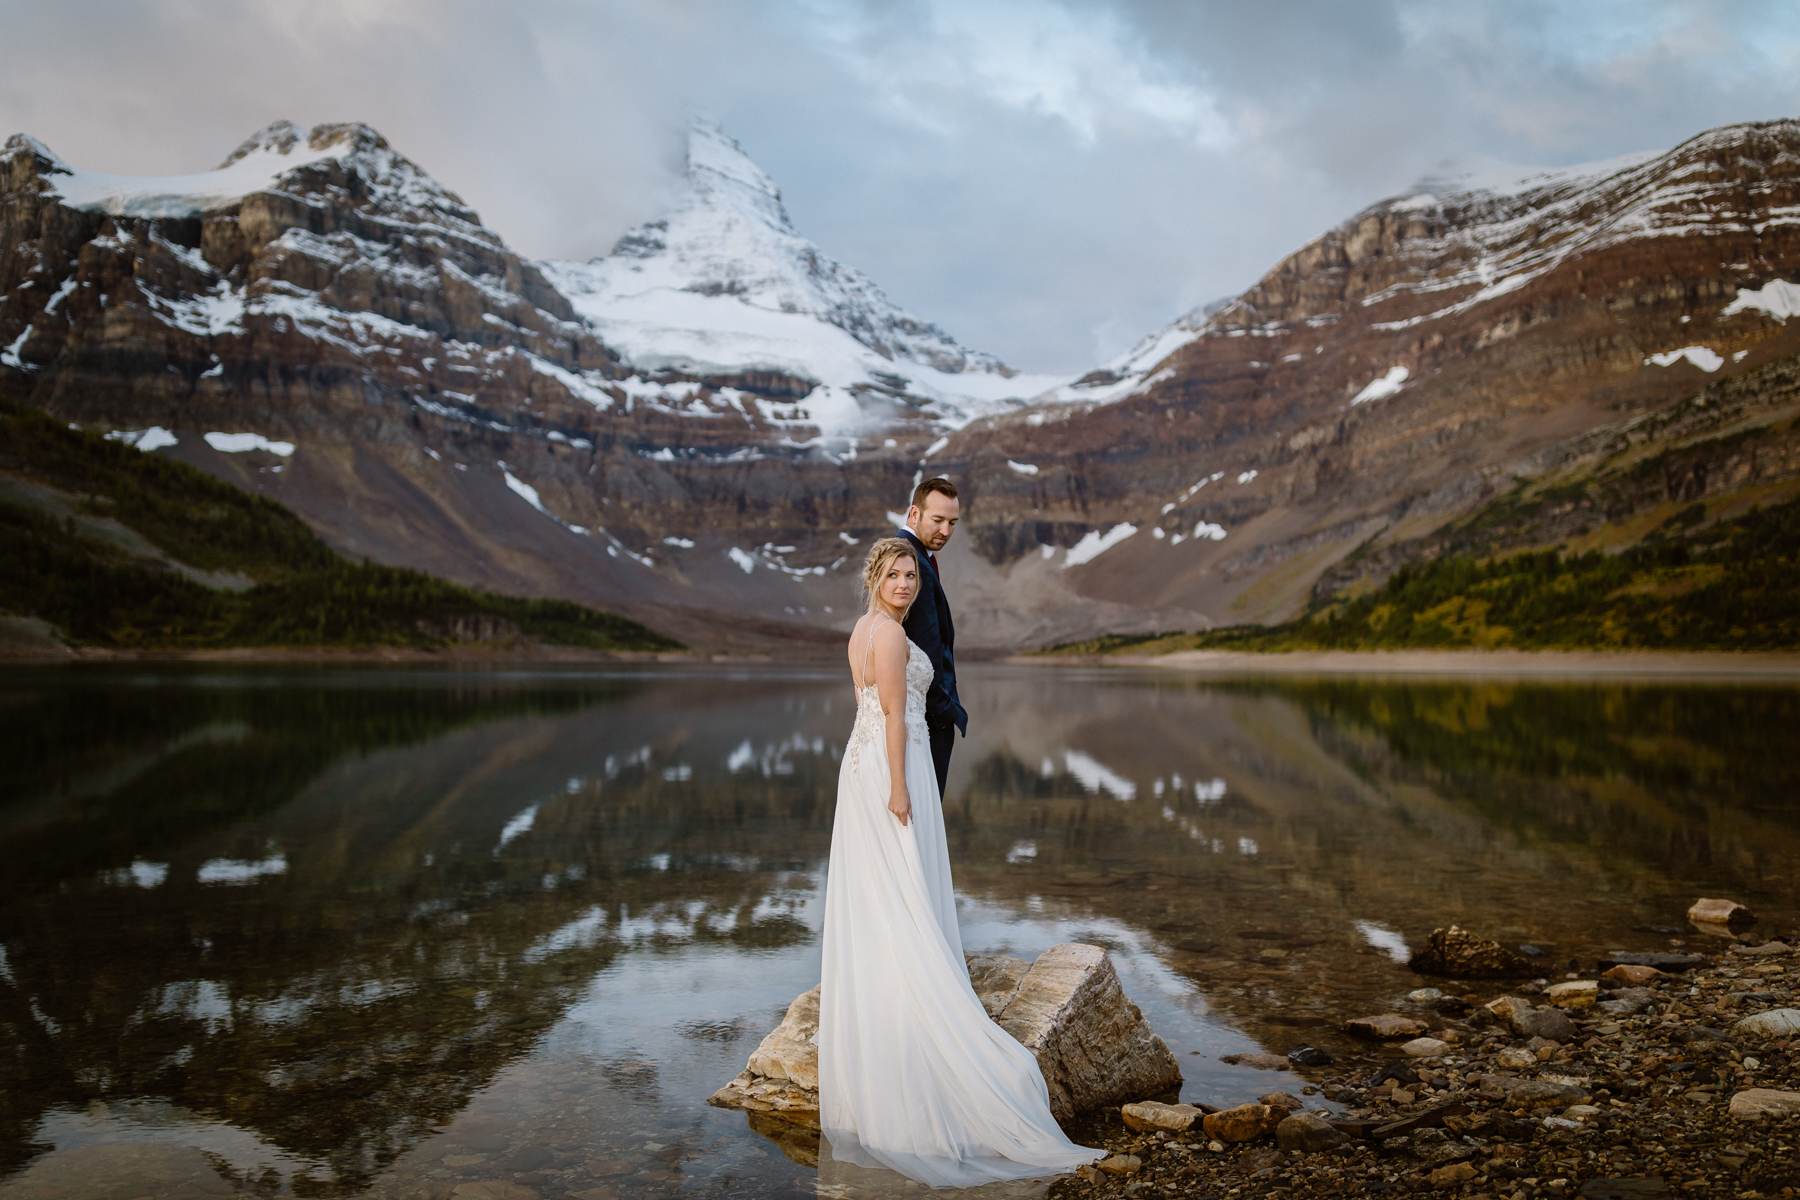 Mount Assiniboine Elopement Photographers at a Backcountry Lodge - Photo 58